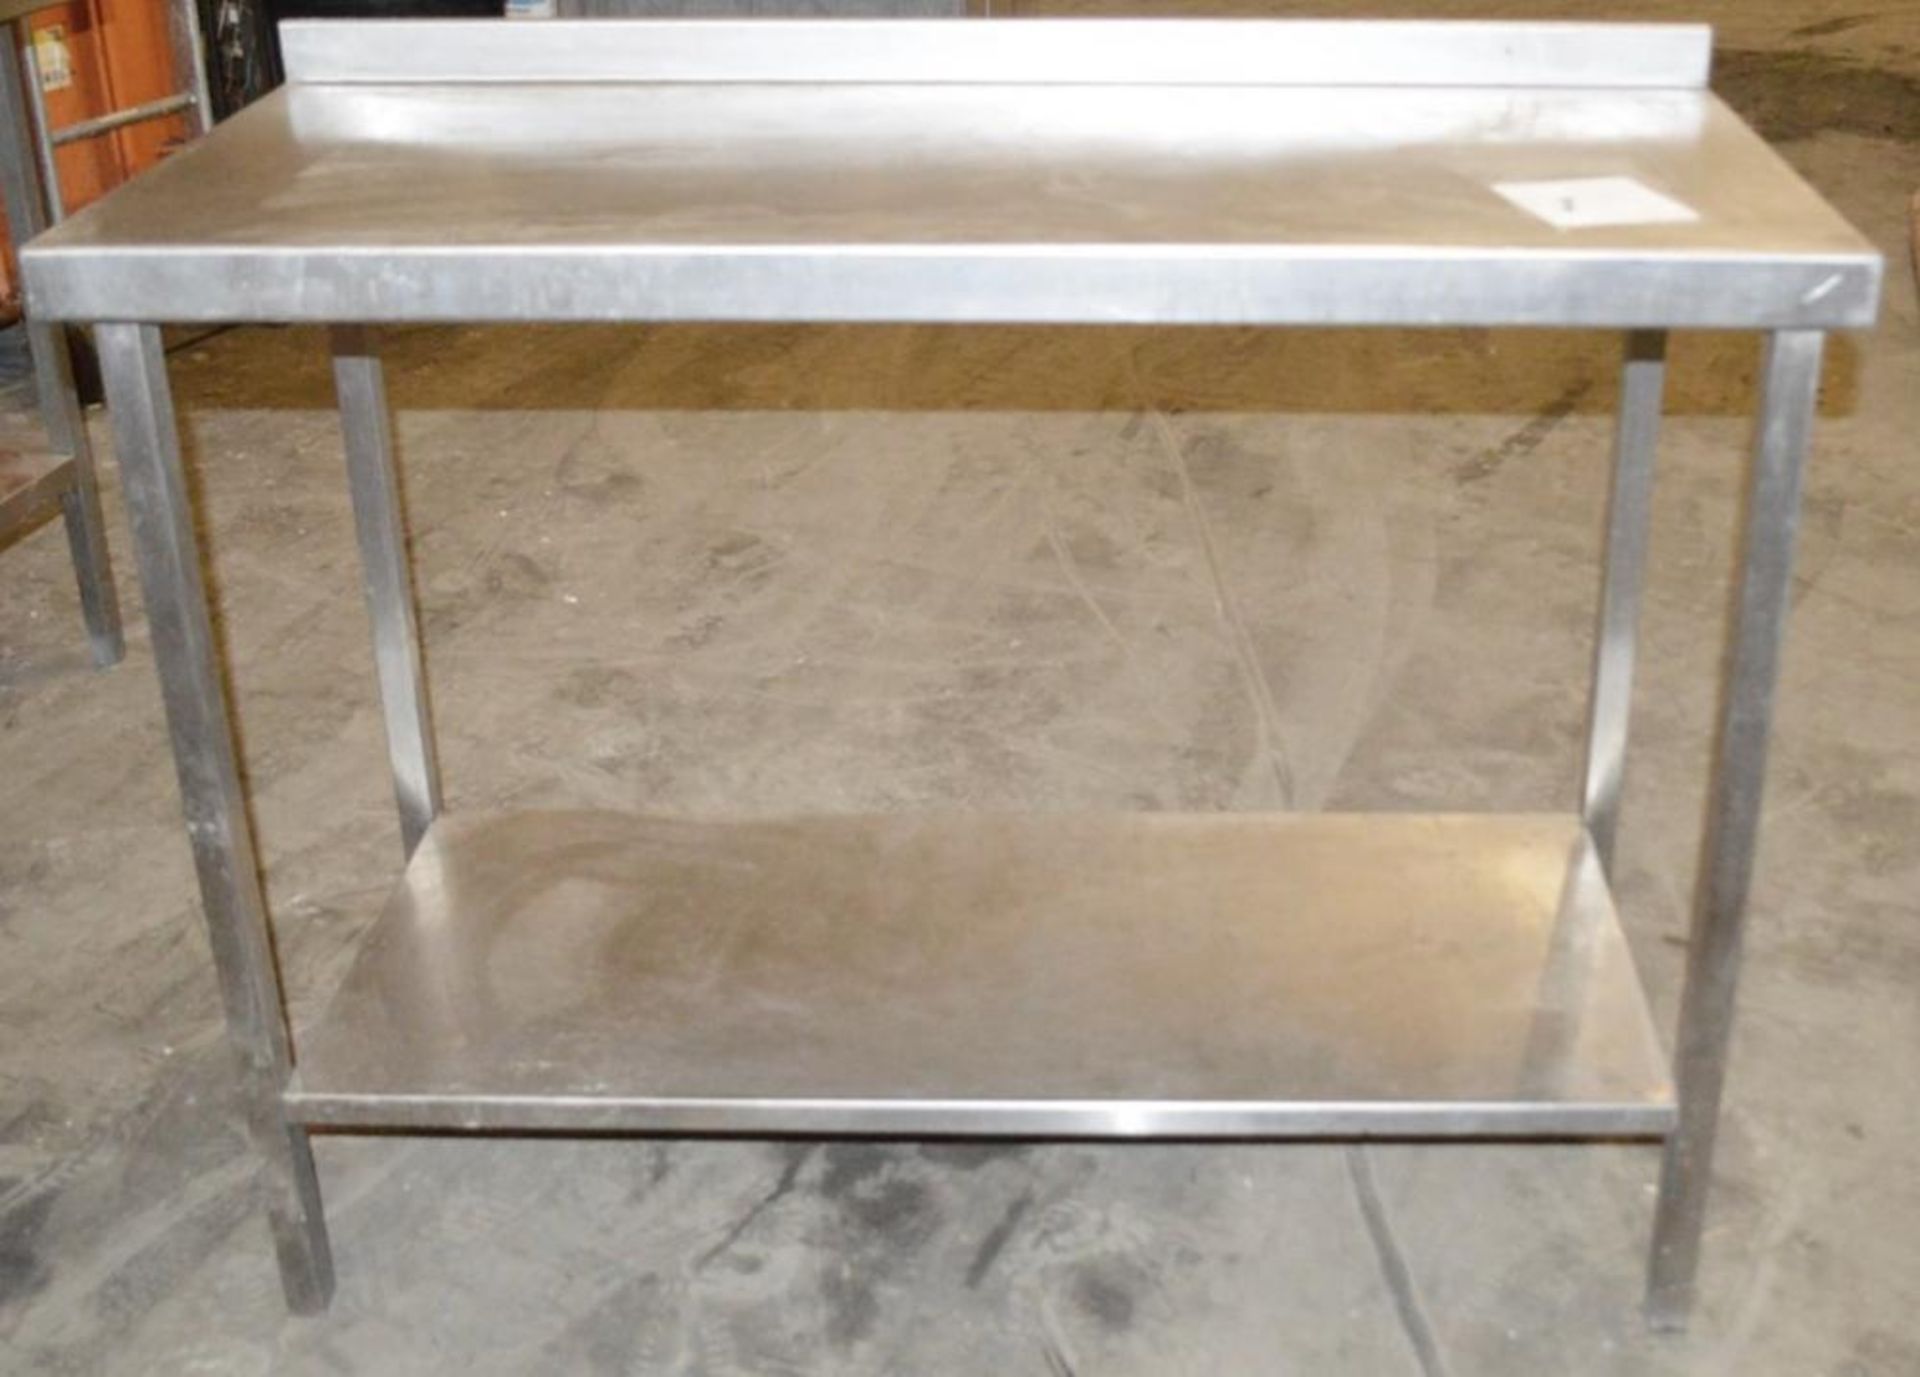 1 x Stainless Steel Prep Bench With Upstand - Dimensions: W116 x D50 x H92cm - £1 Start, No Reserve